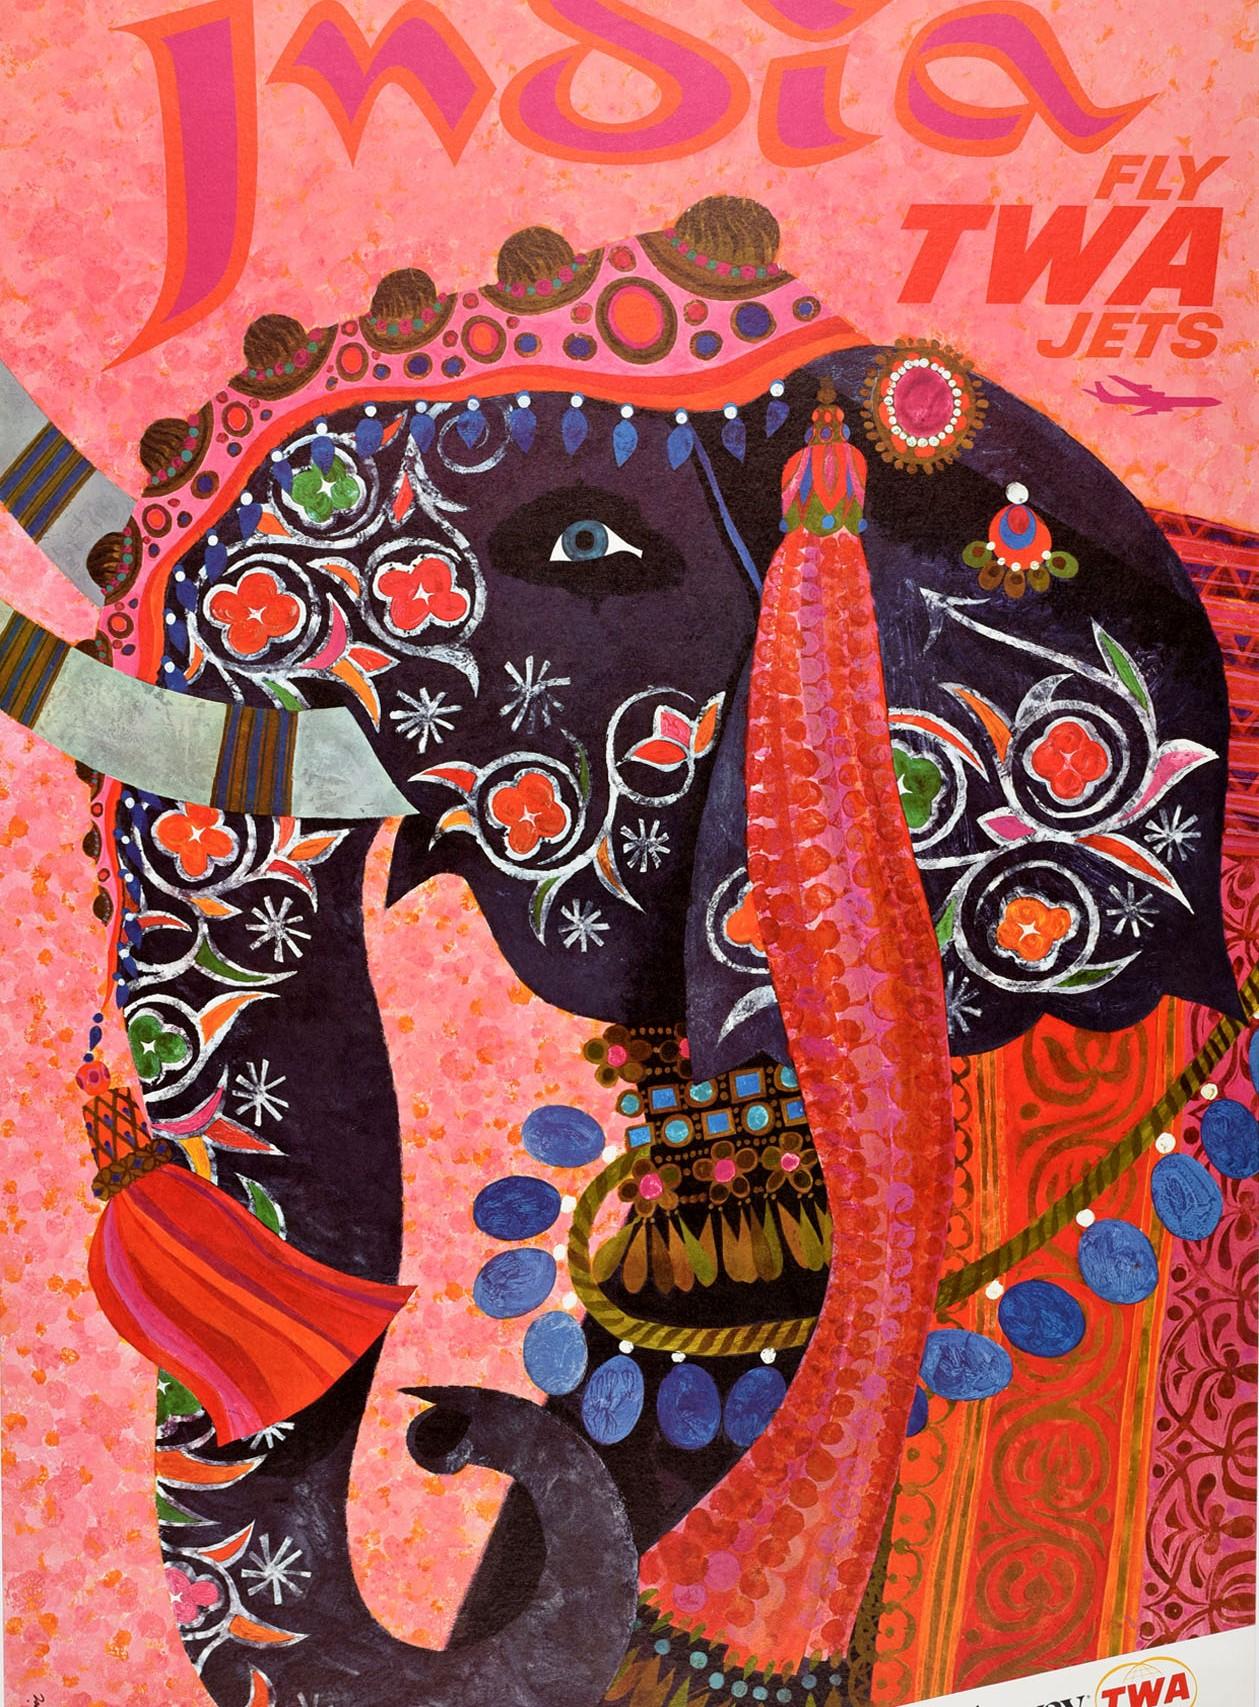 Original vintage travel poster for India Fly TWA Jets Up Up and Away featuring a colourful design by the American artist David Klein (1918-2005) depicting a decorative Indian elephant with smiling eyes in front of a pink shaded background, an image